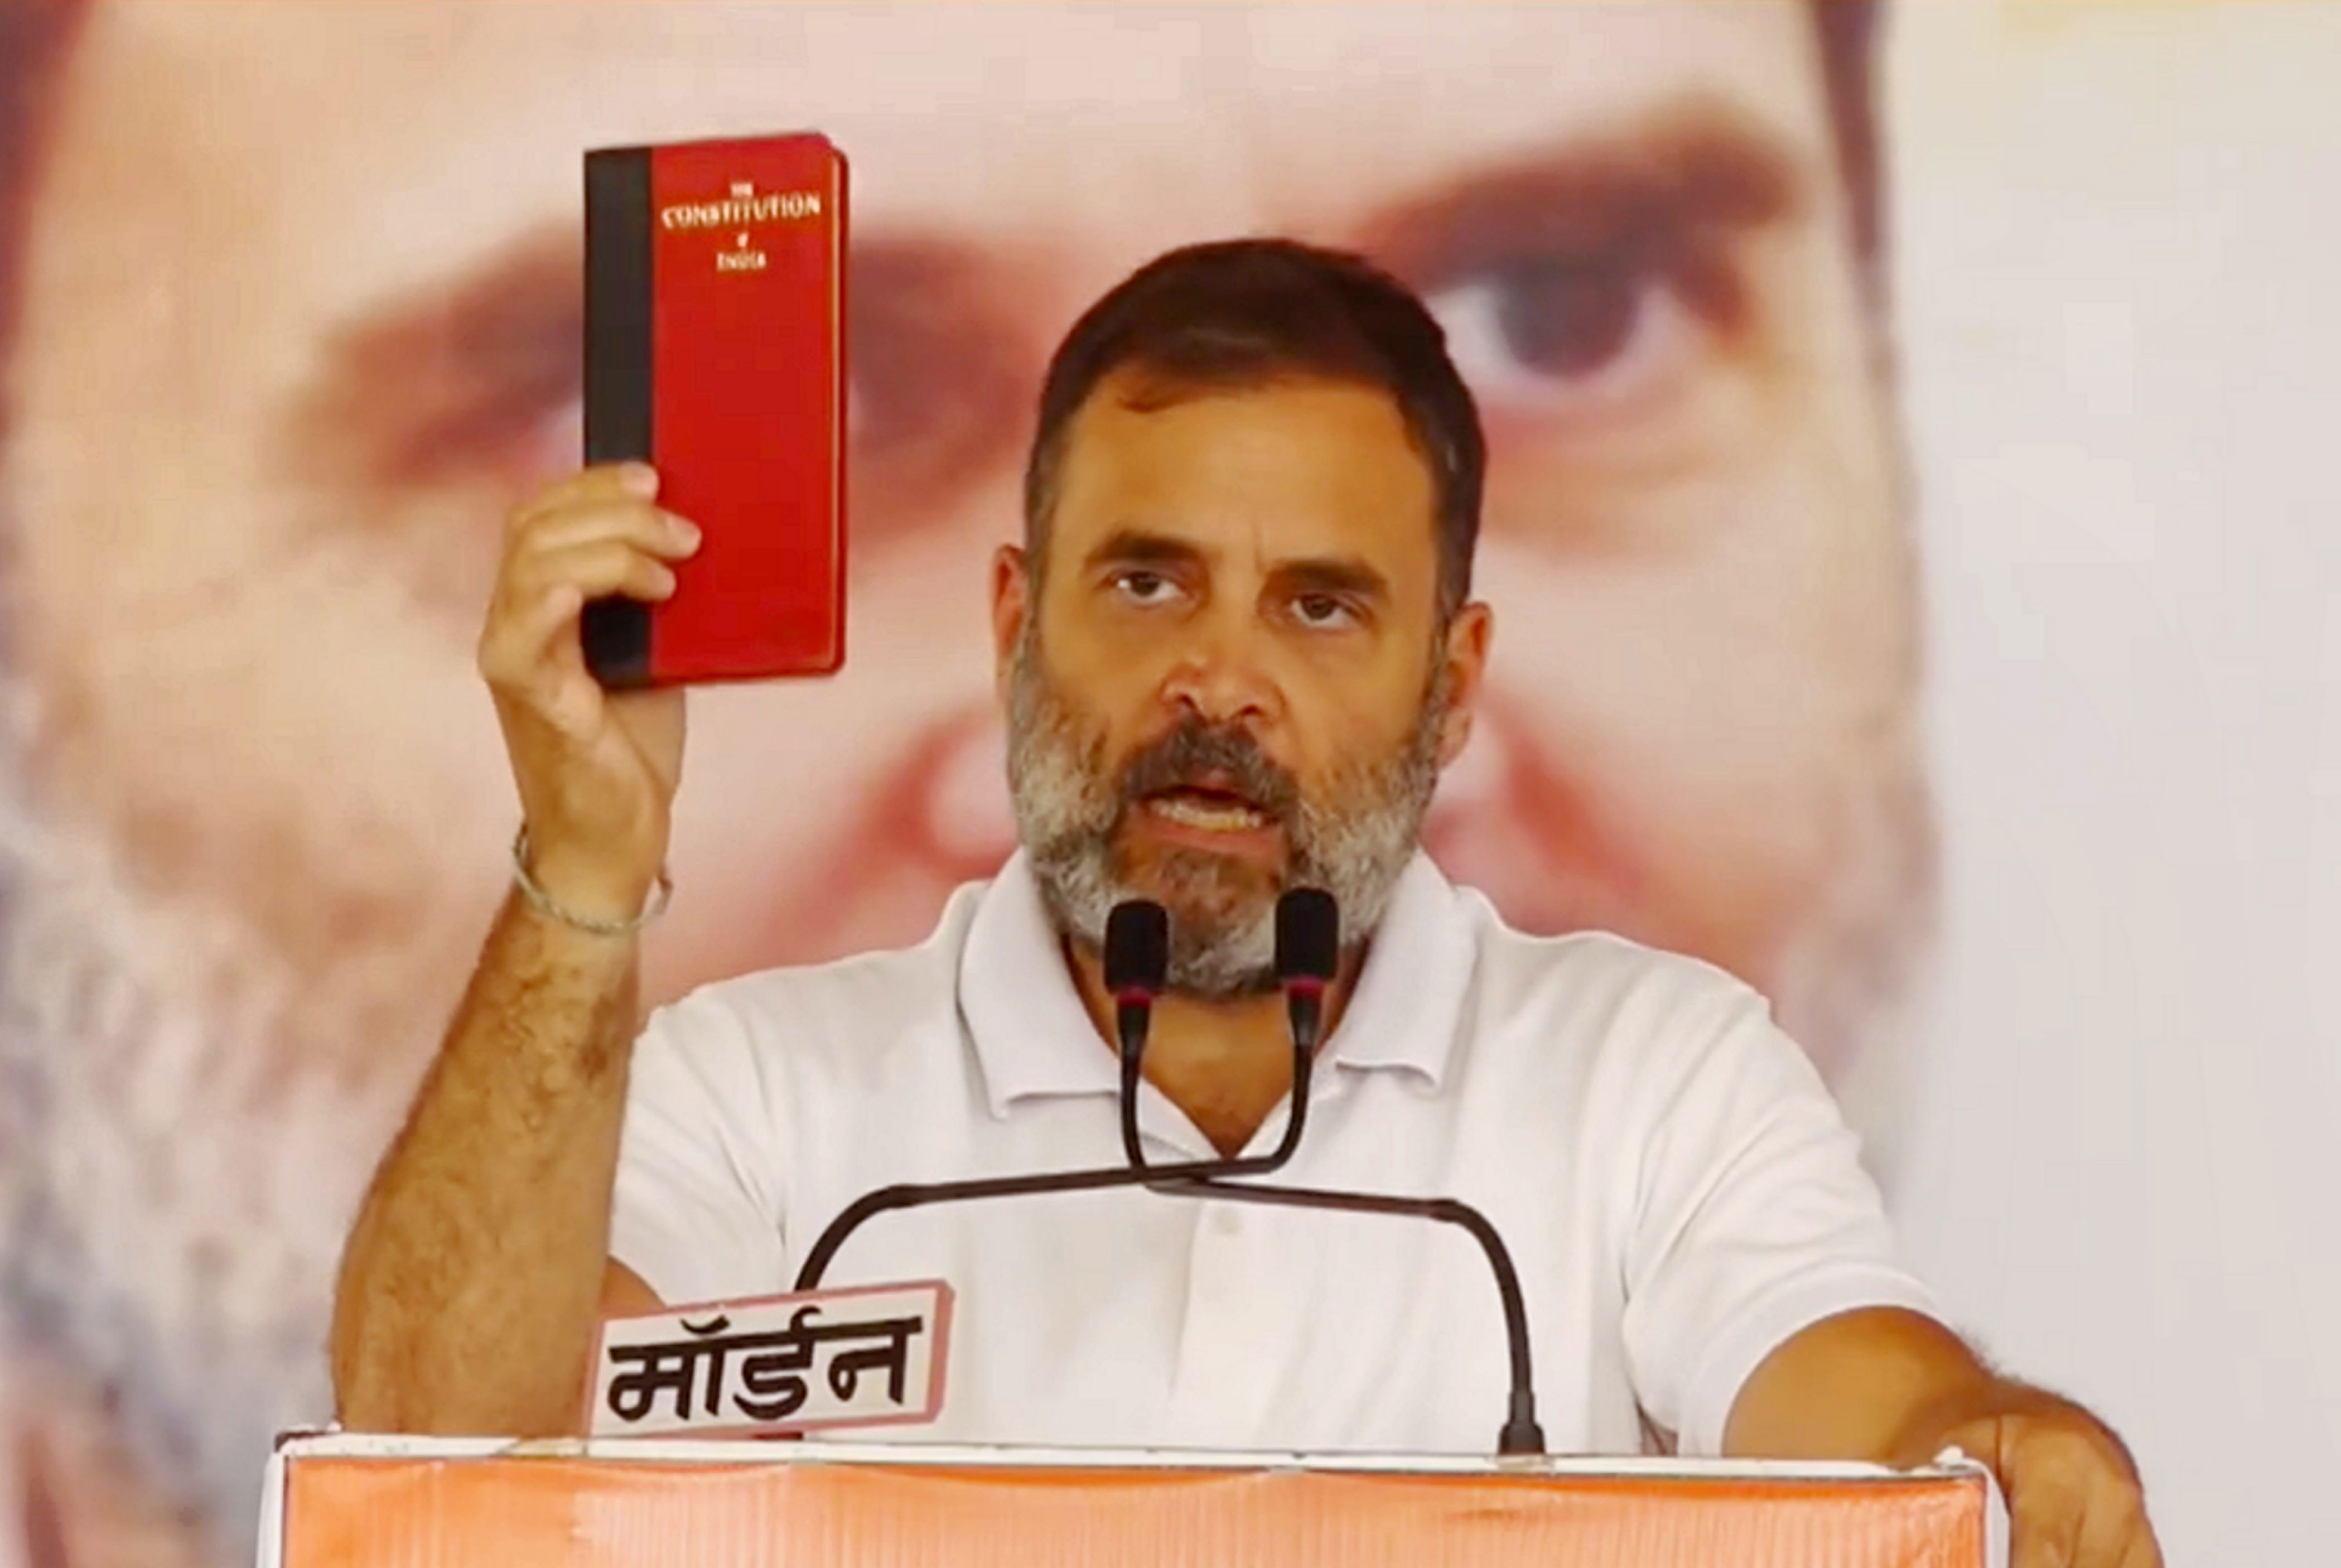 bjp will 'throw away' constitution if it returns to power, claims rahul gandhi